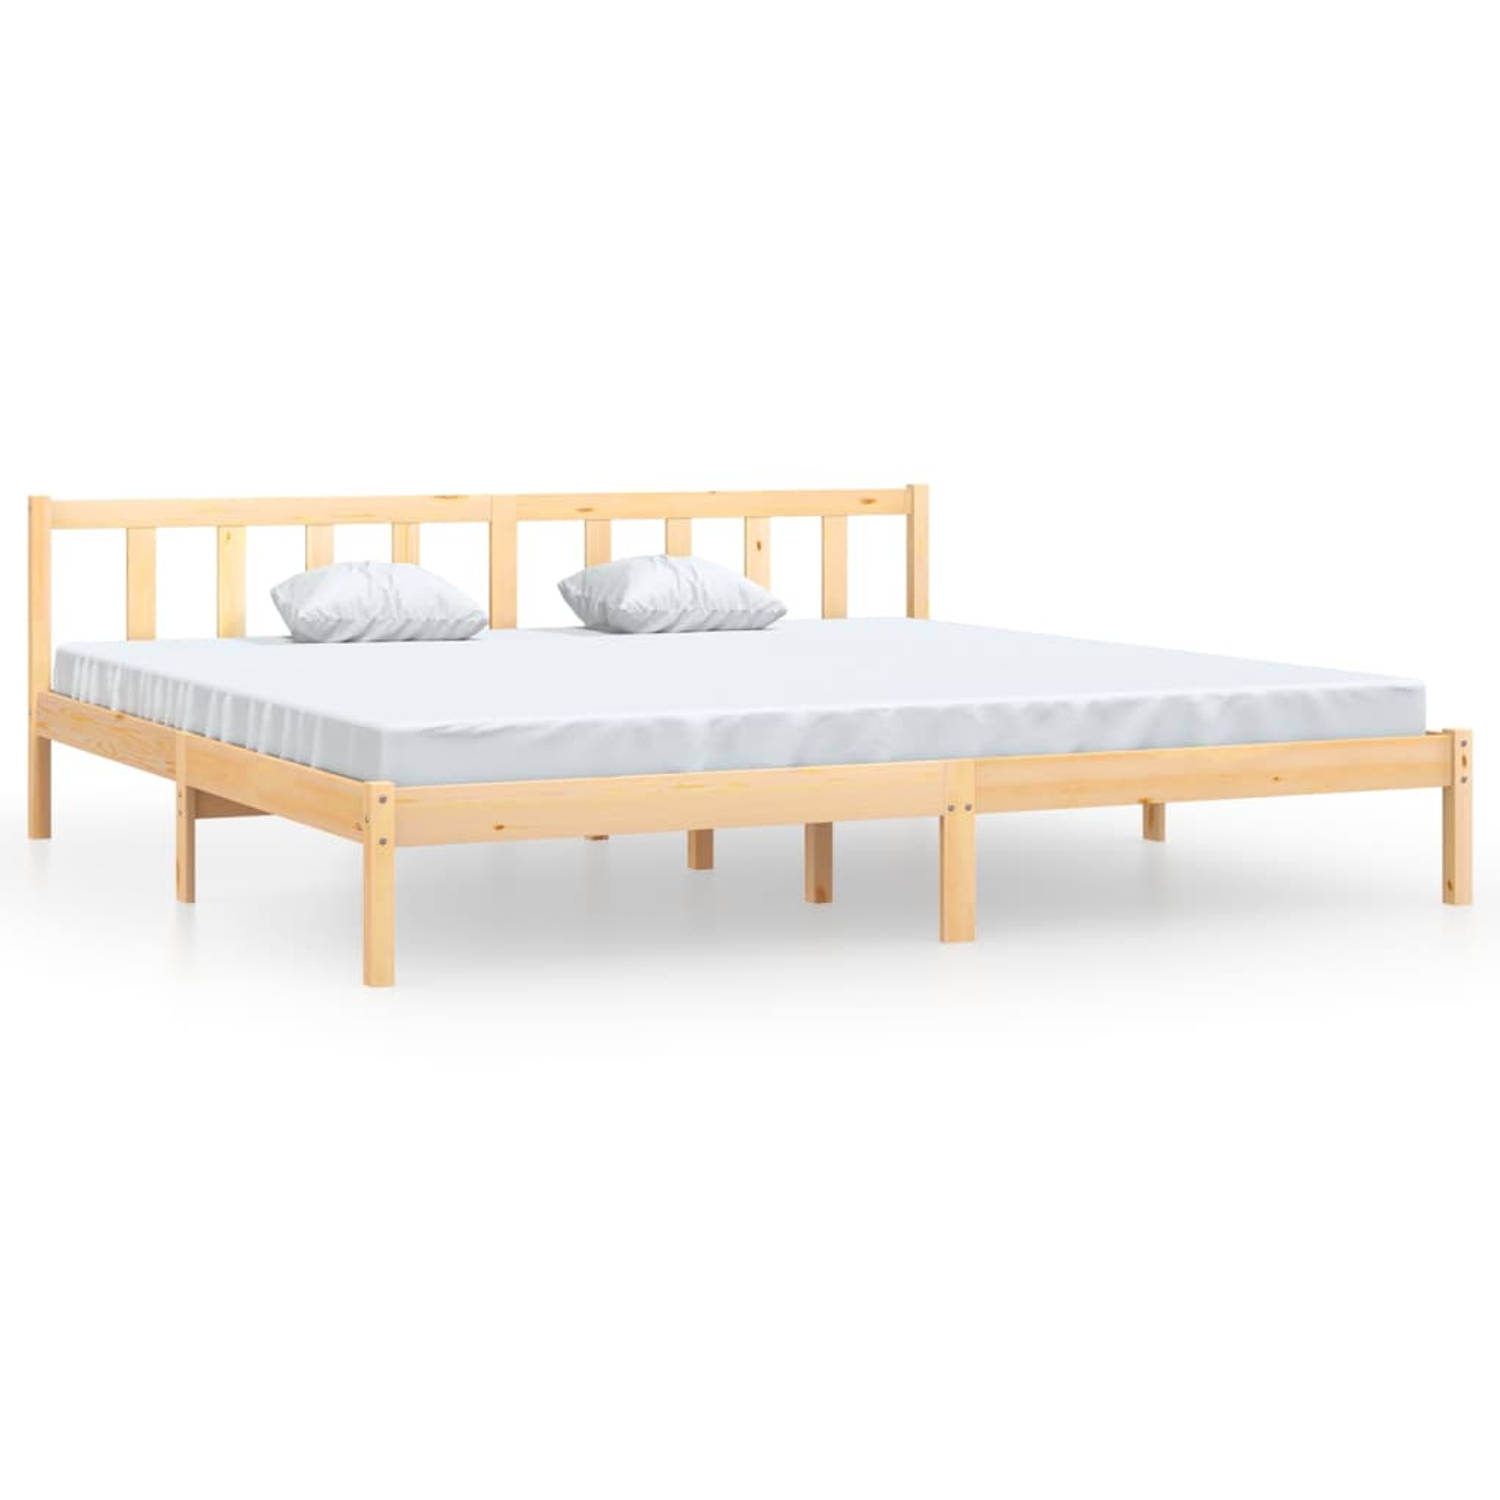 The Living Store Bedframe massief grenenhout 180x200 cm 6FT Super King - Bedframe - Bedframe - Bed Frame - Bed Frames - Bed - Bedden - 1-persoonsbed - 1-persoonsbedden - Eenpersoon